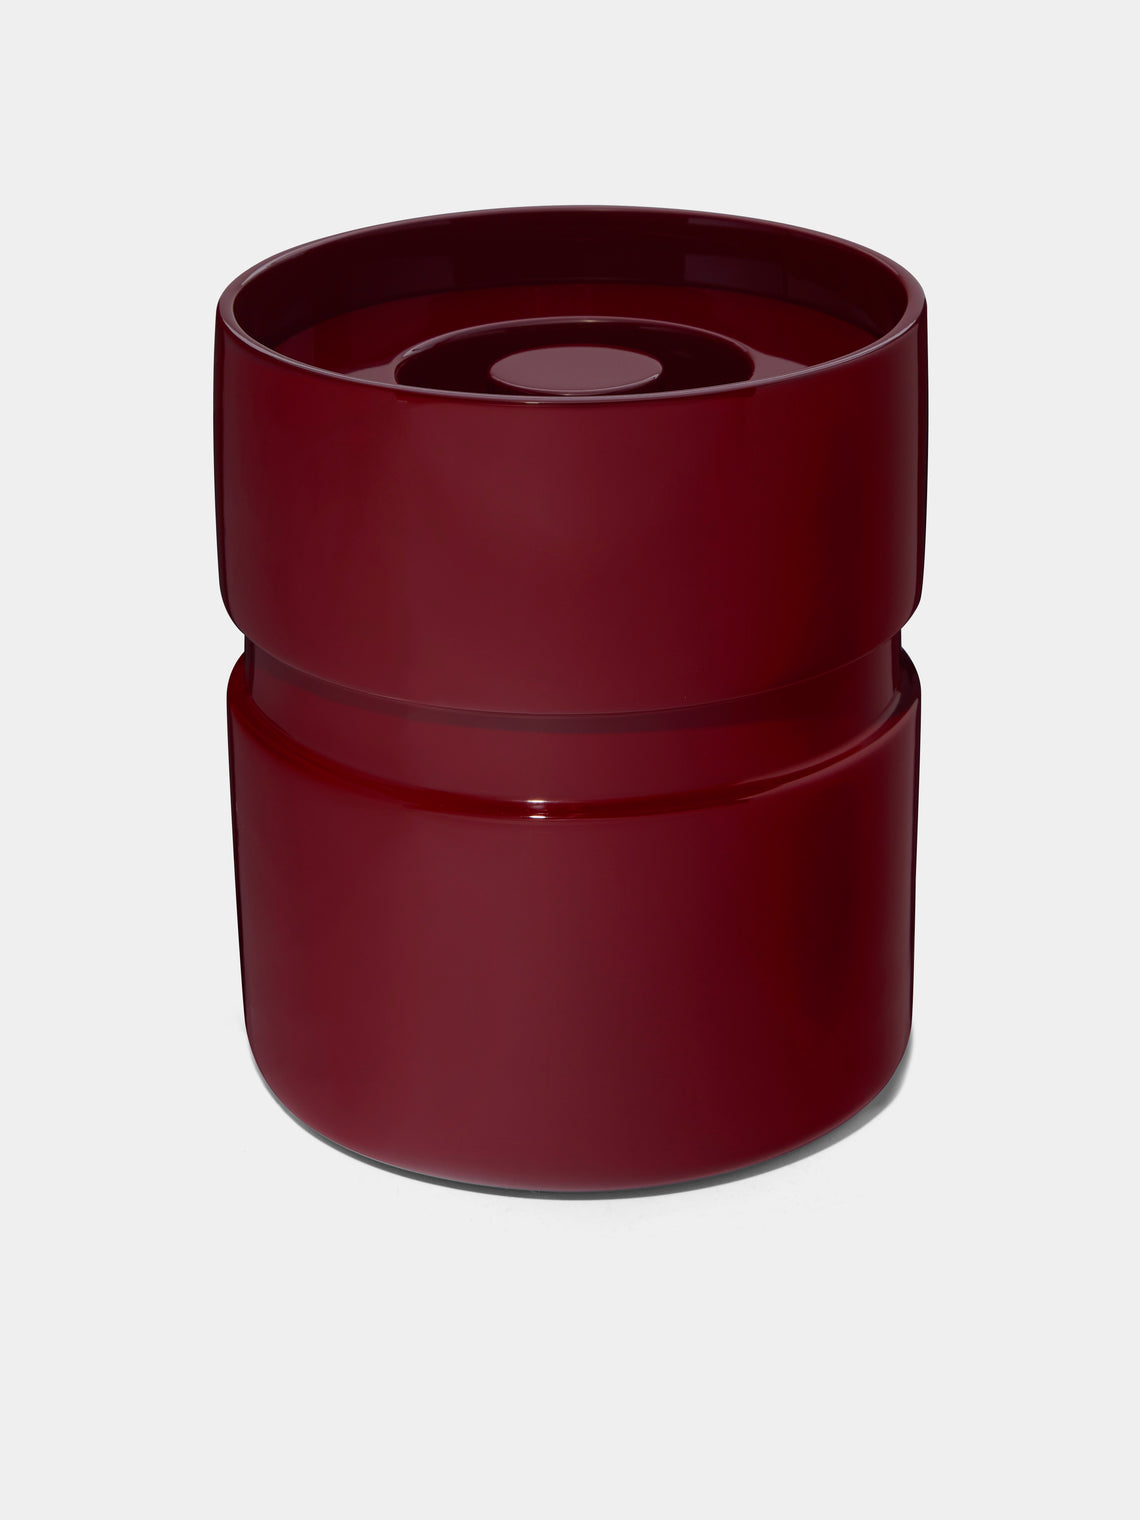 The Lacquer Company - Lacquered Ice Bucket - Red - ABASK - 